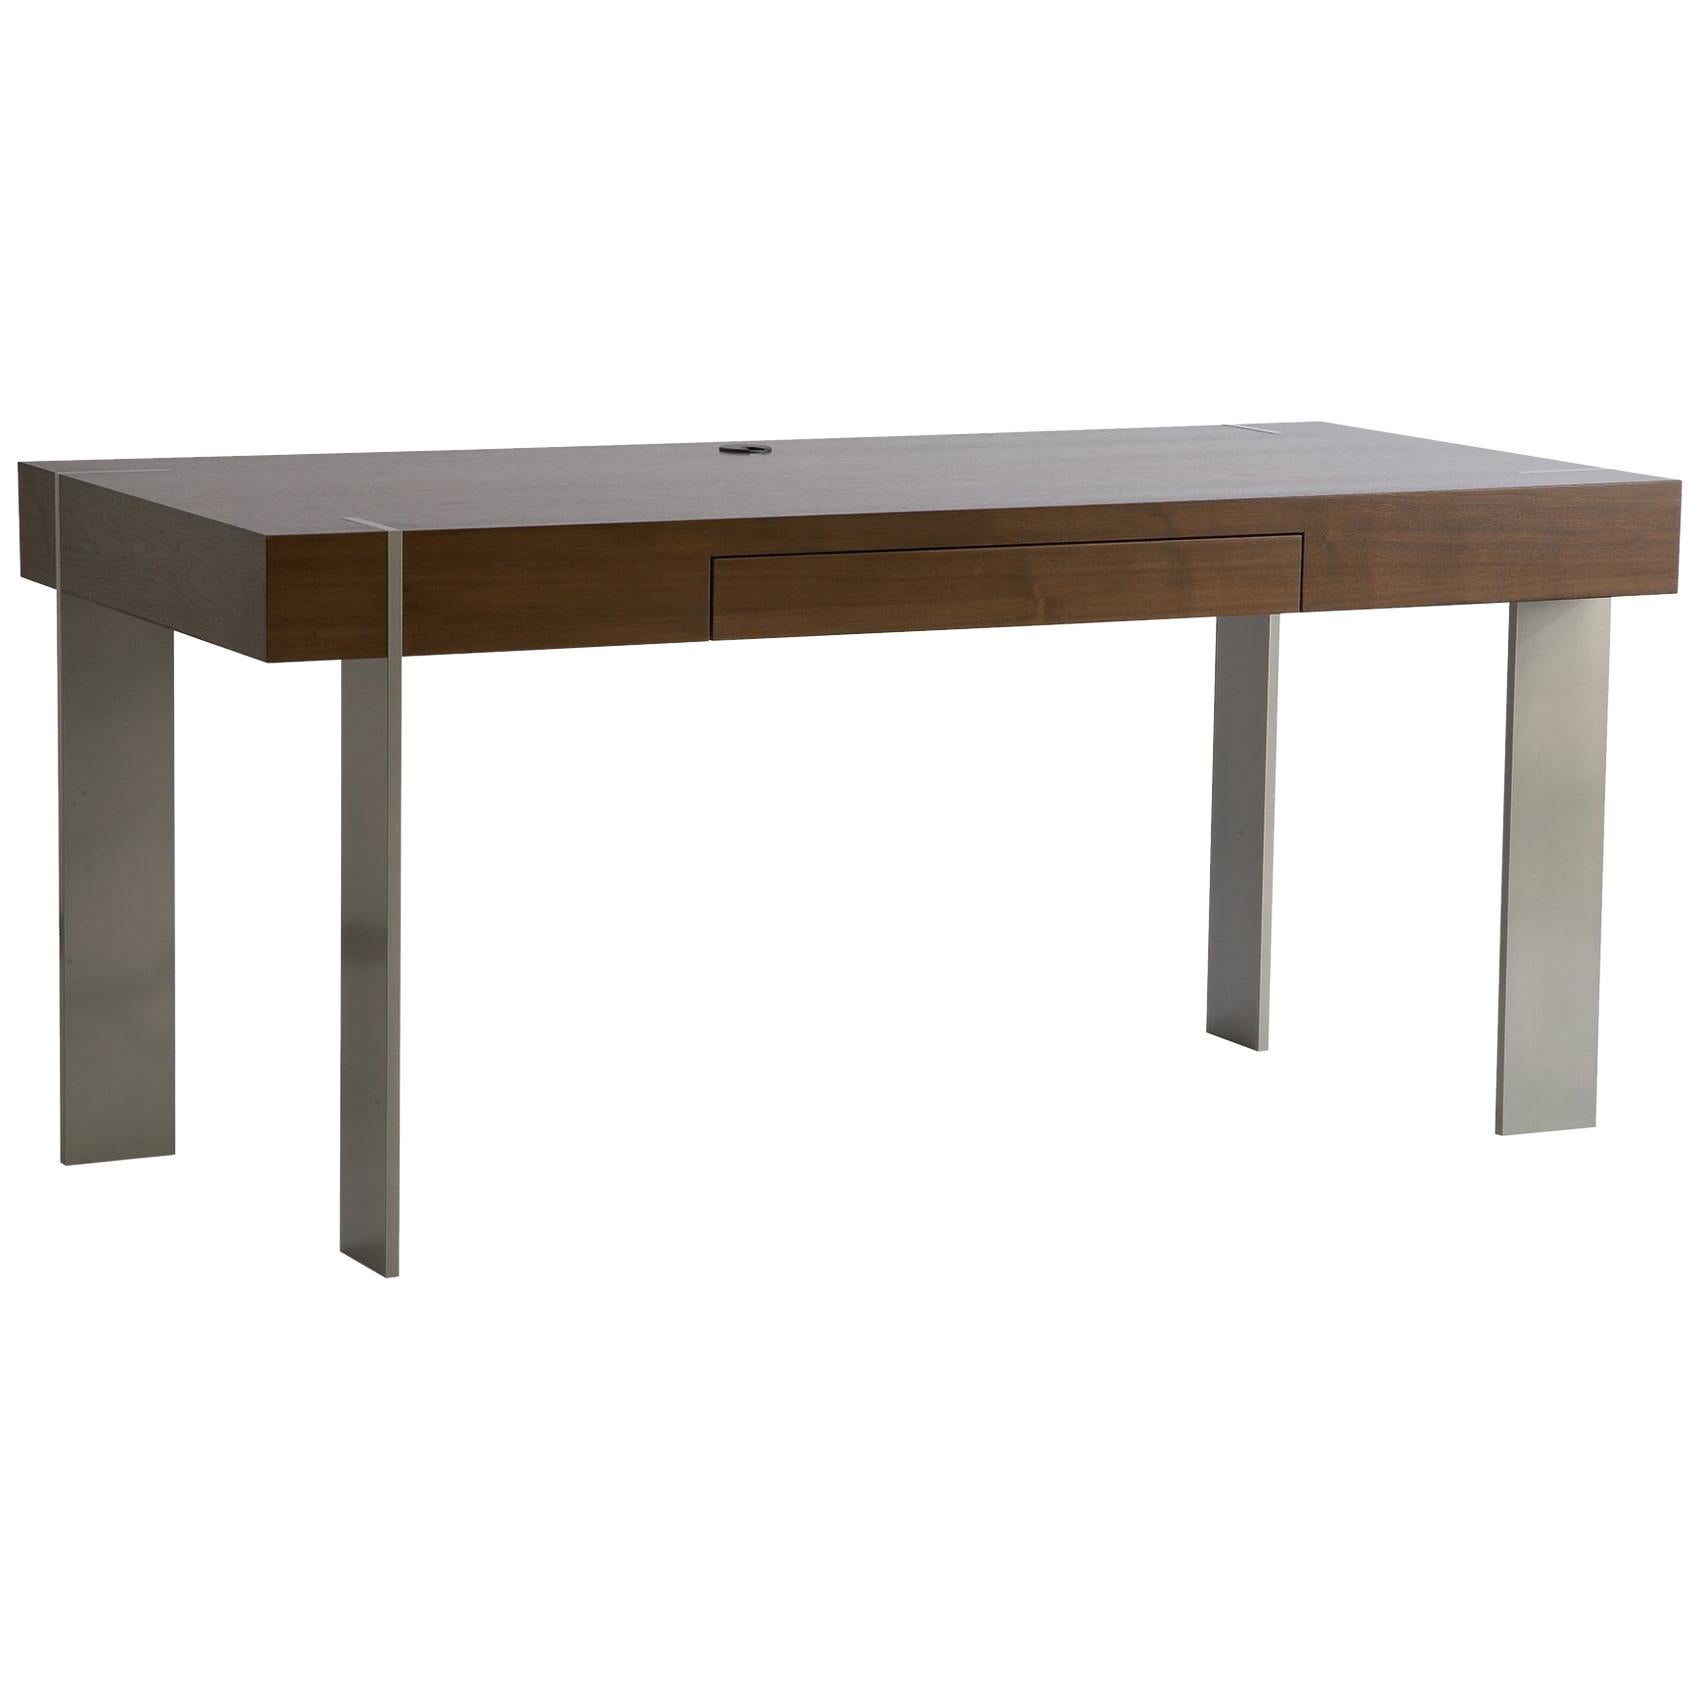 DK-21 Desk with Metal Legs by Antoine Proulx For Sale